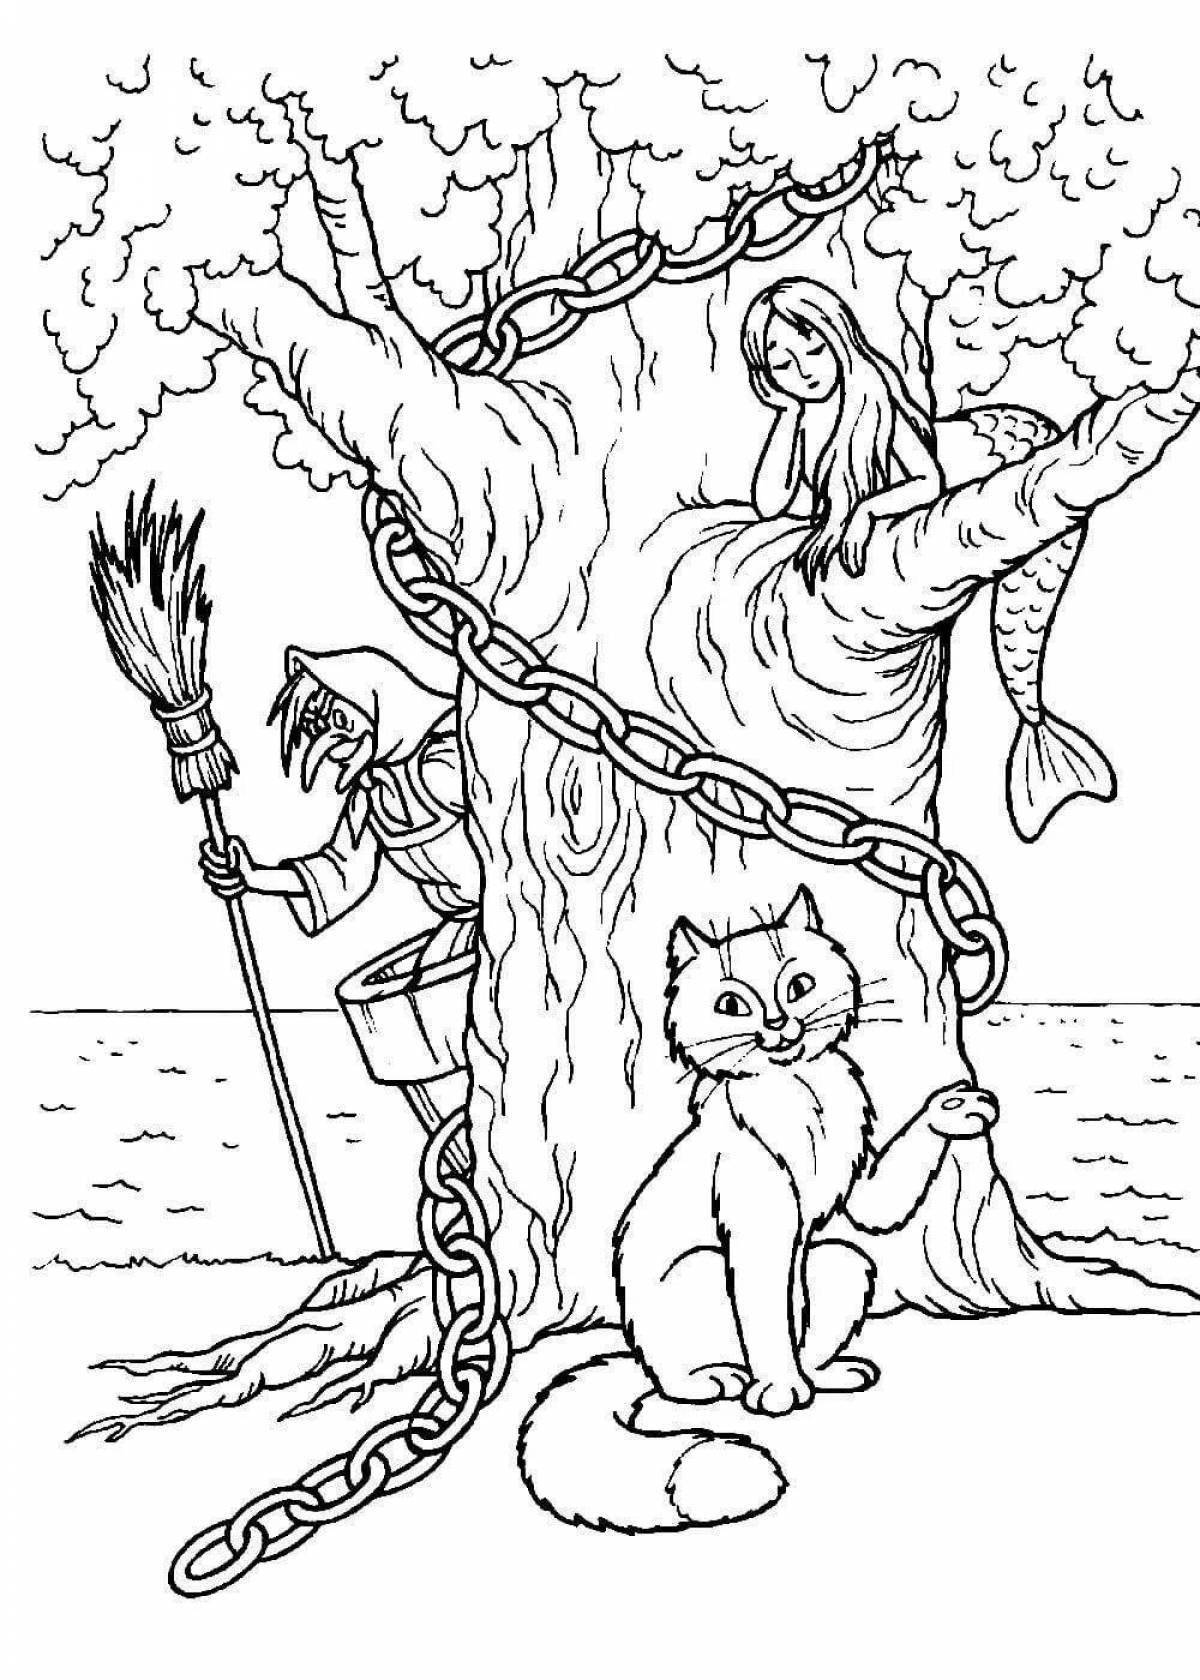 Amazing fairy tale coloring pages